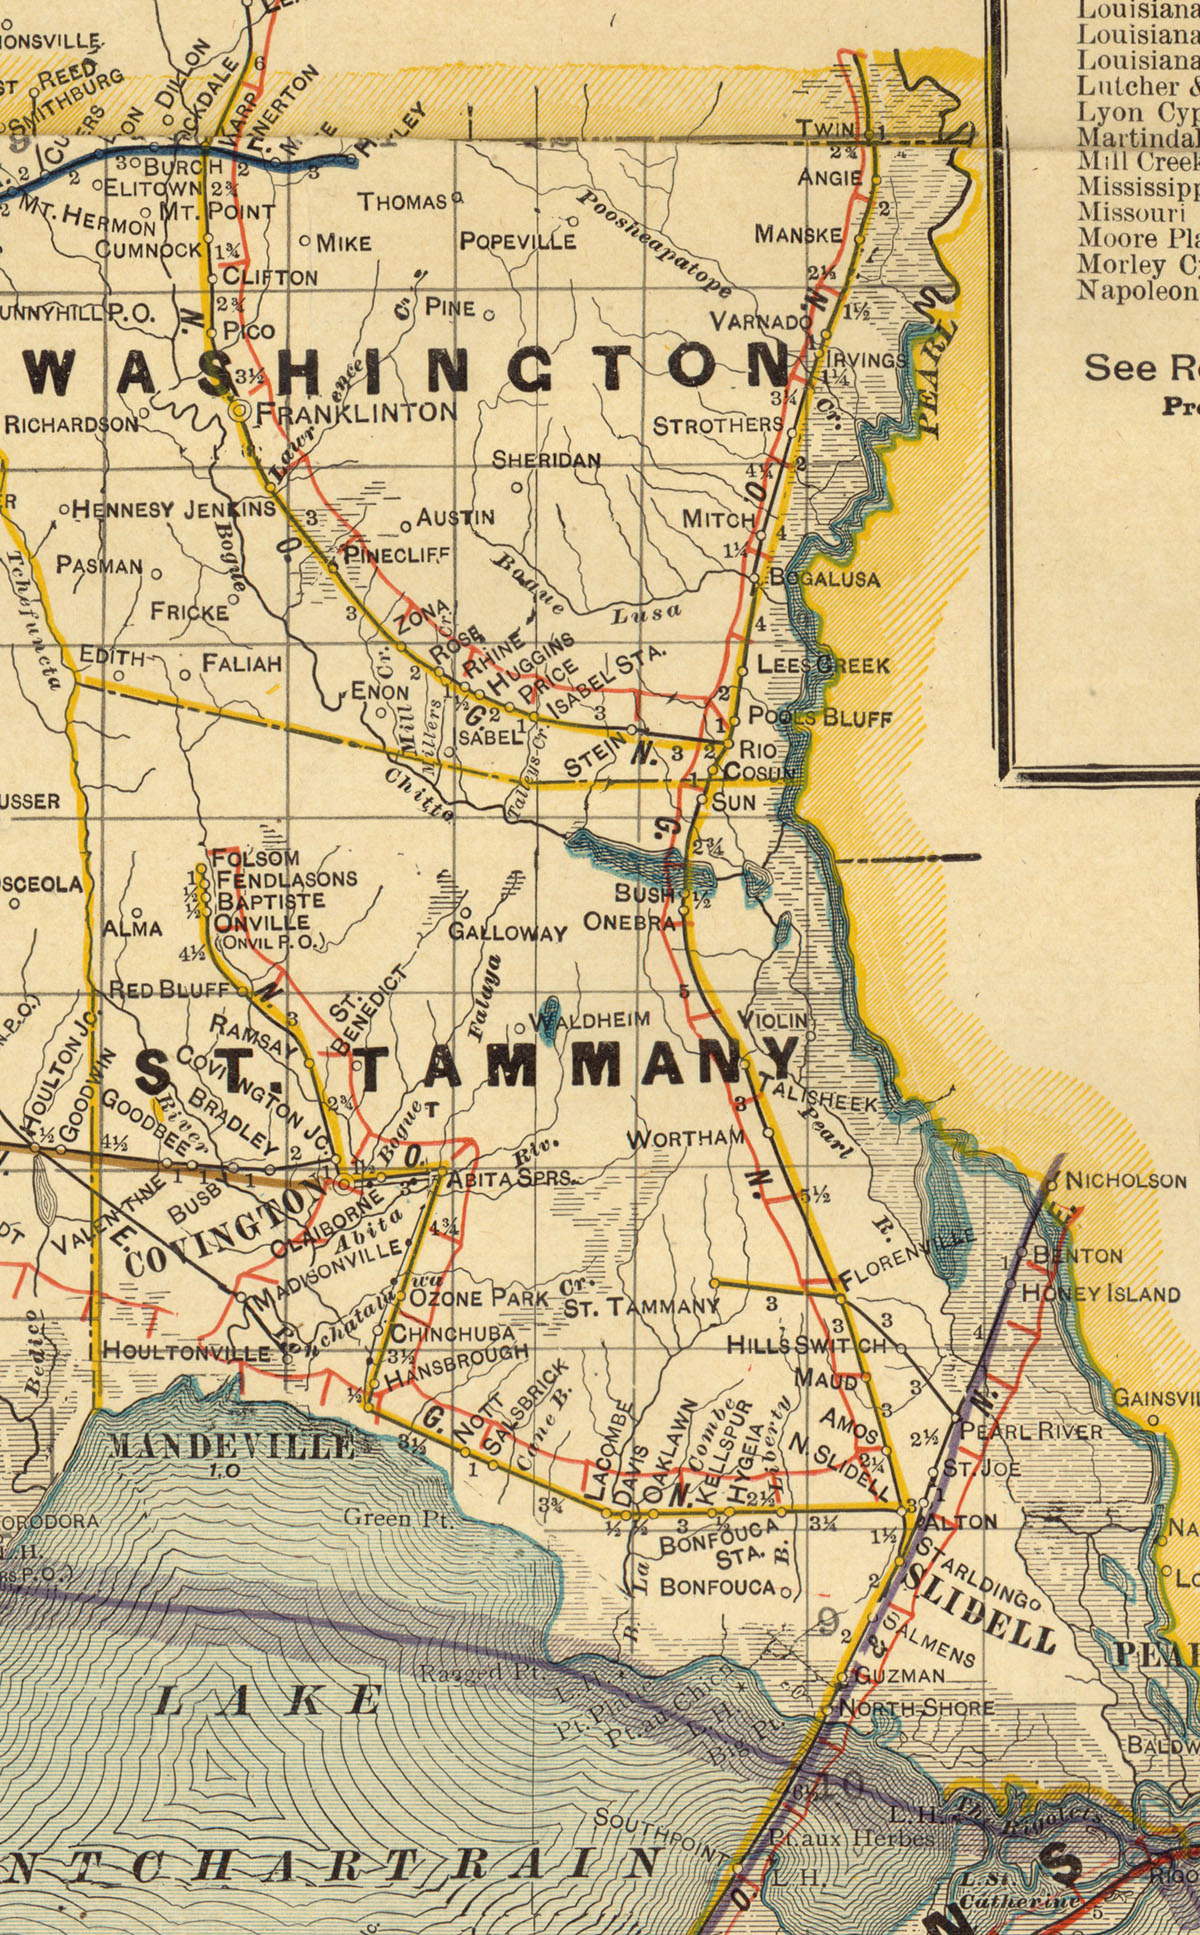 New Orleans Great Northern Railroad Company (La.), Map Showing Route in 1913.